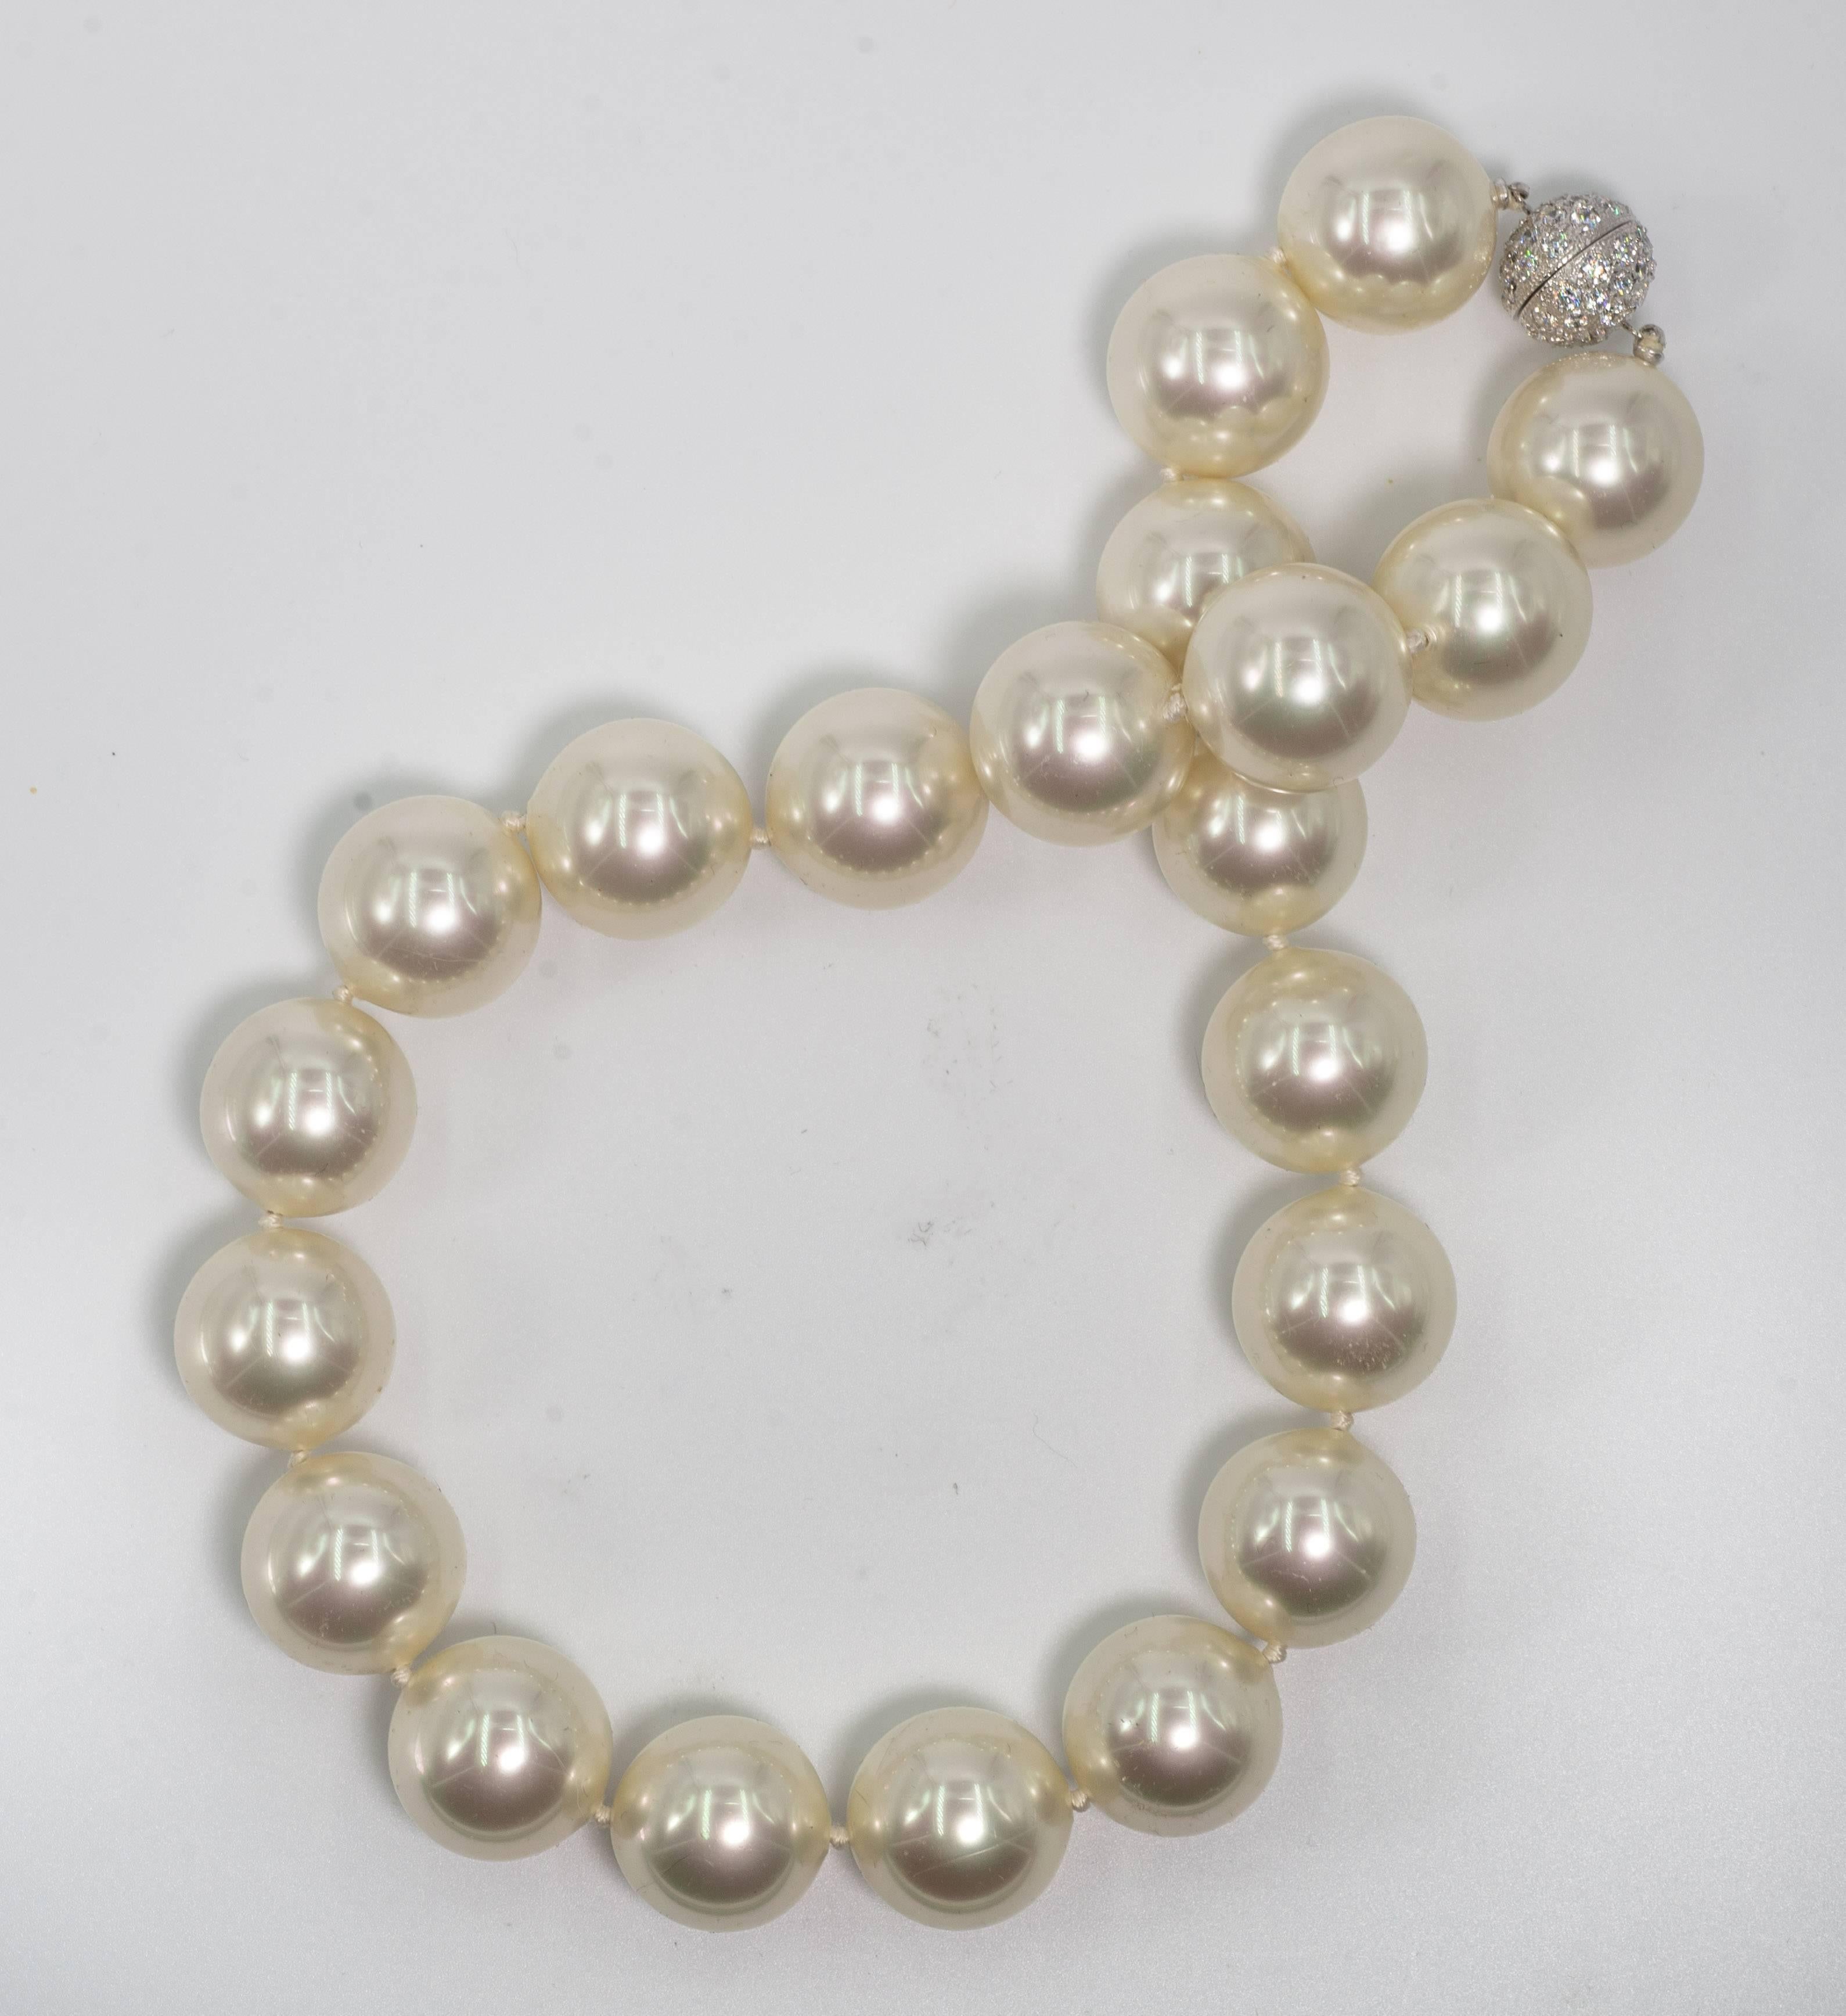 Theresa May Style stunning 20inch faux 20mm French White South Sea Color  handmade pearls by France's oldest faux pearl makers dating back to Napoleon lll. .The pearls are hand strung and knotted to a wonderful pave cubic zircon sterling clasp.